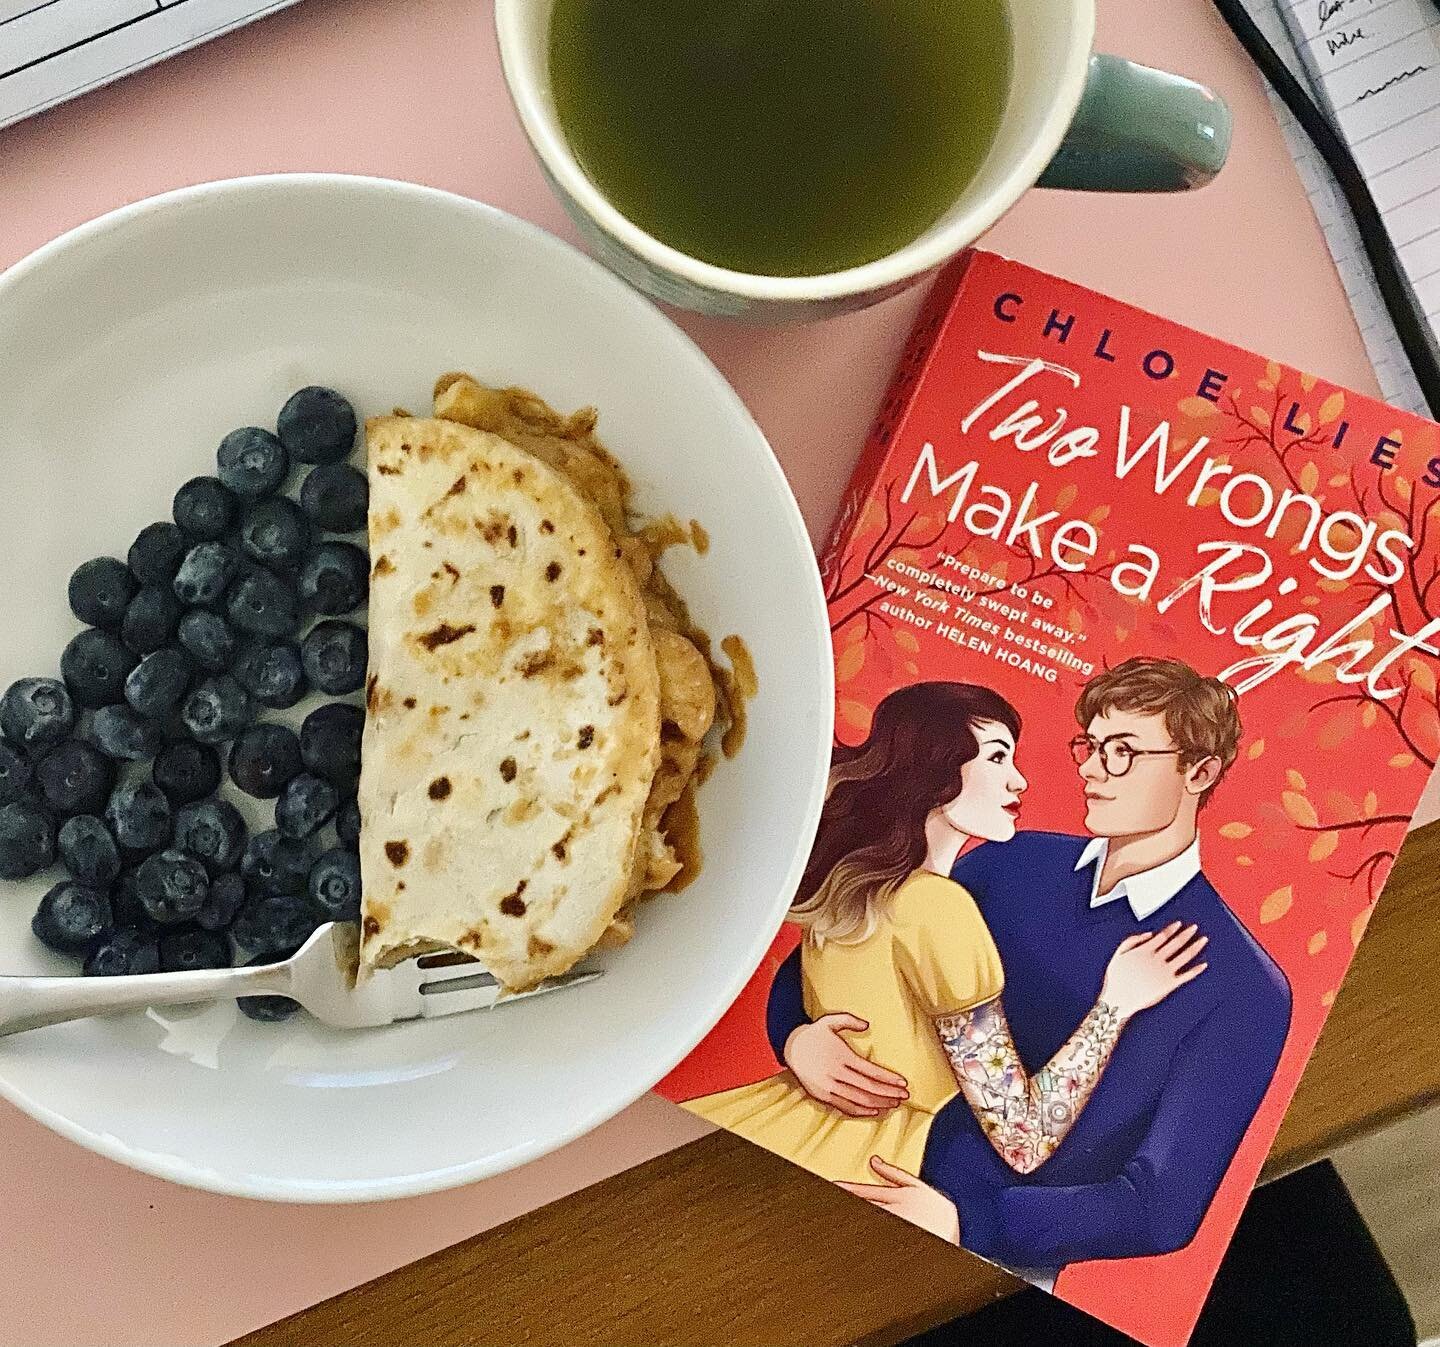 Starting the day with an incredible book, a peanut butter and banana &ldquo;quesadilla,&rdquo; and a cup of green tea (in honor of the starchy, tea-loving hero of Two Wrongs Make a Right)

I&rsquo;m a big Much Ado fan and this reimagining of it remin